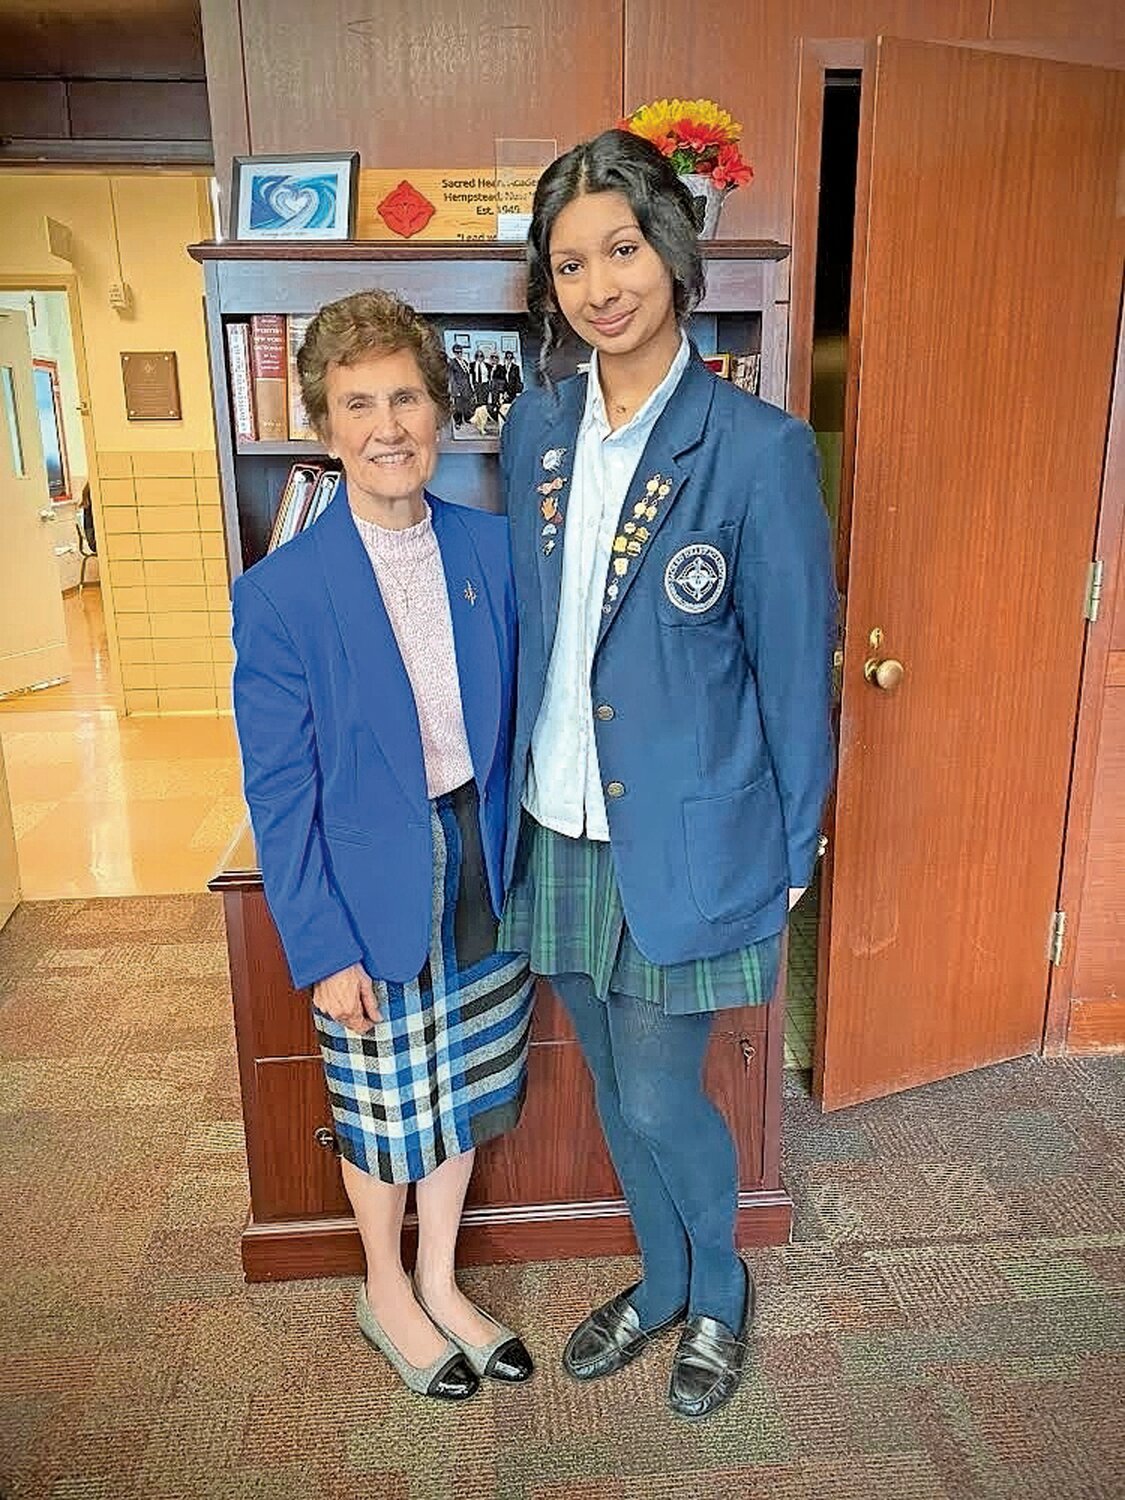 Shadia Suha, at left, and Hilary Rojas Rosales joined Sacred Heart Academy principal Sister Jean Amore to celebrate the $40,000 scholarship and 12-week internship they earned for next fall when both begin college. Shadia and Hilary balanced an intense academic schedule with relaxing activities like raising parakeets and staying sharp on musical instruments.